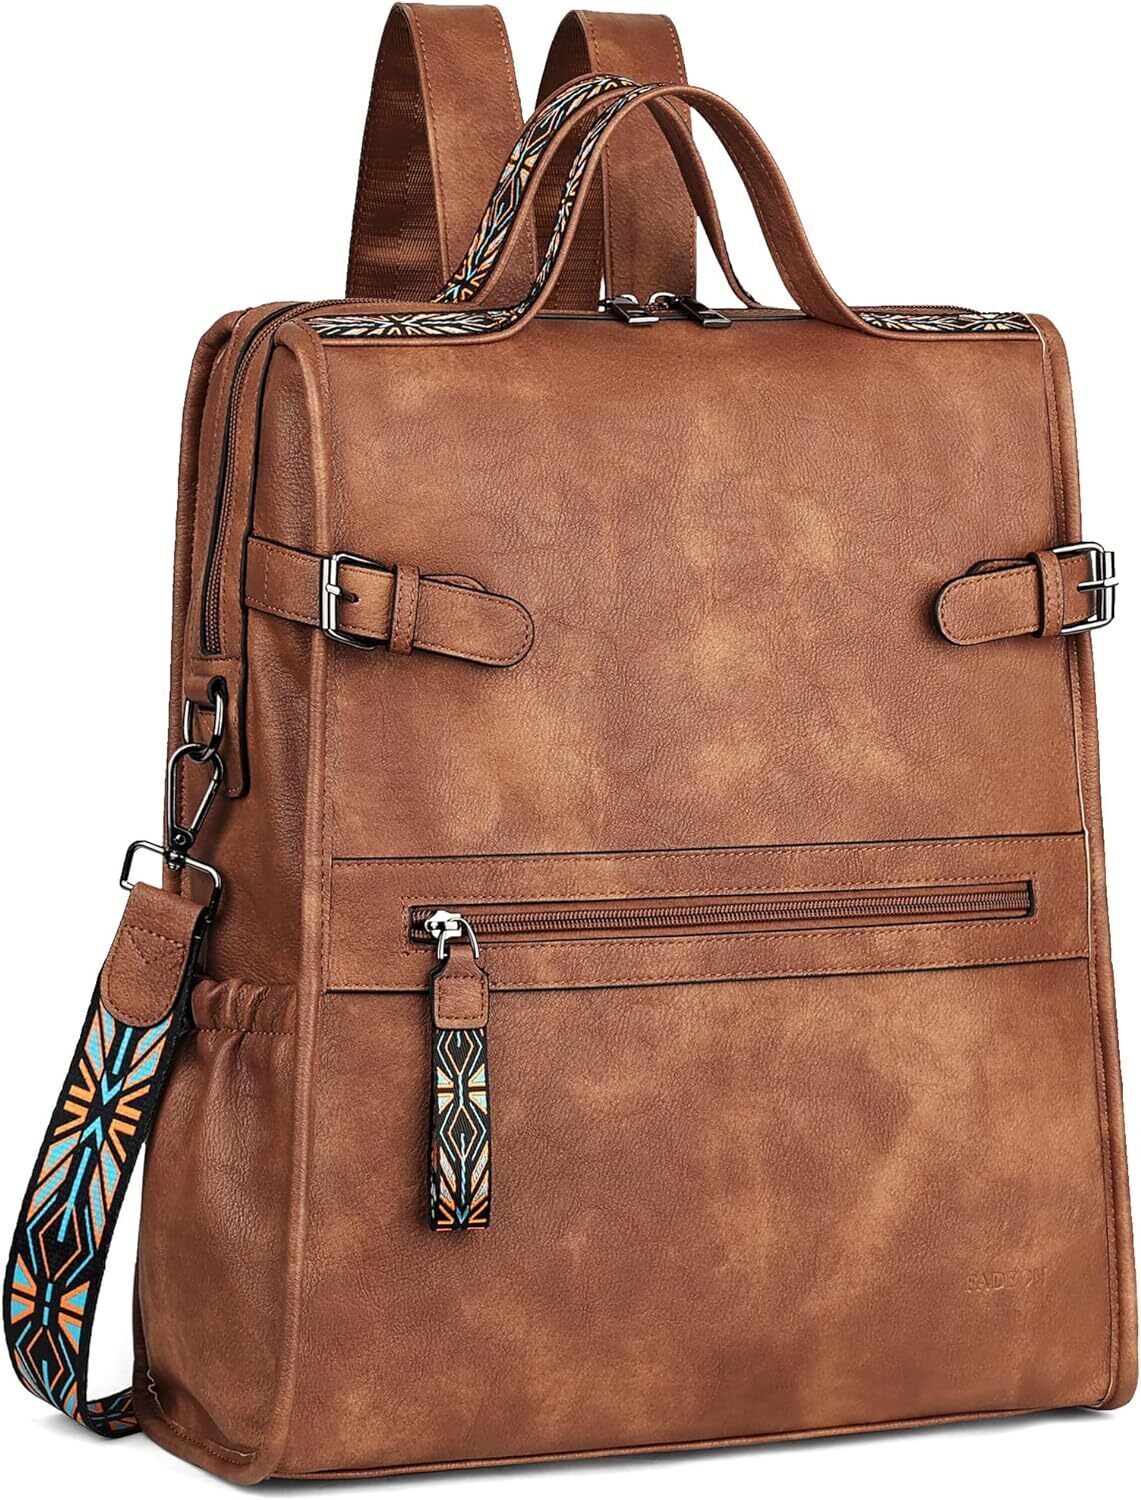 FADEON Leather Laptop Backpack for Women, Designer Ladies Work Purse Brown 